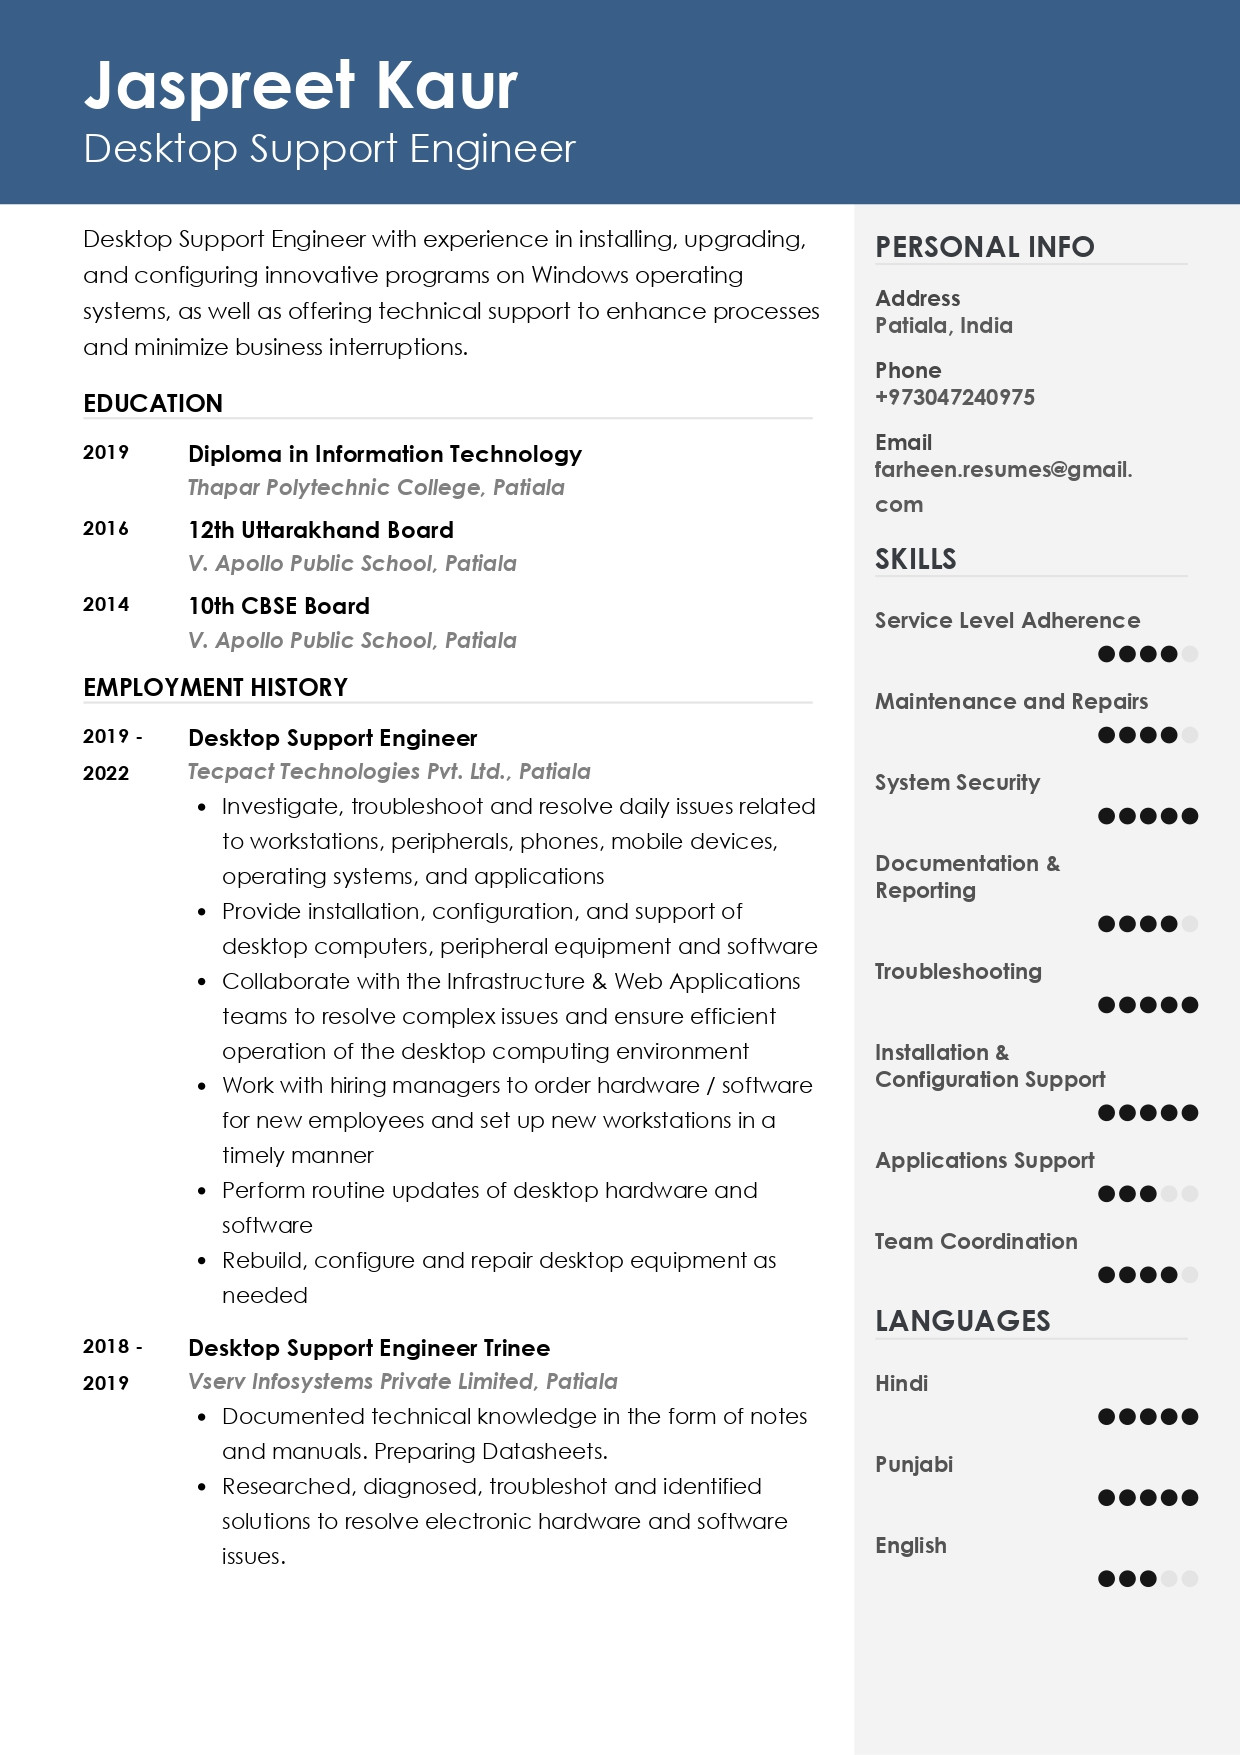 Product Engineer Resume Sample Automotive Dynamic Sealing Sample Resume Of Automotive Engineer with Template & Writing Guide …